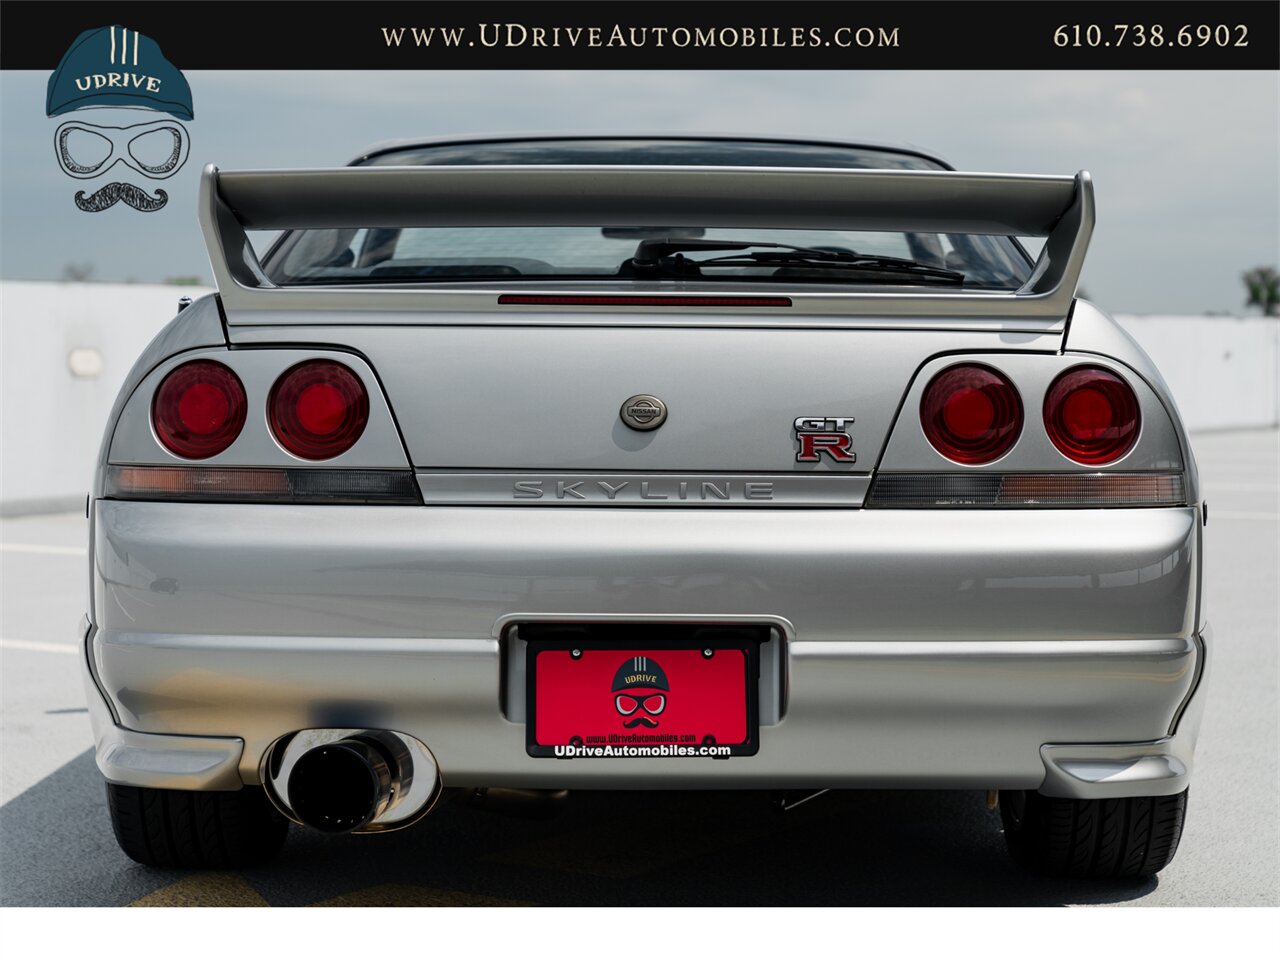 1997 Nissan Skyline GT-R R33 28k Miles Collector Grade  Motorex Legally Imported Titled Federalized Service History - Photo 20 - West Chester, PA 19382